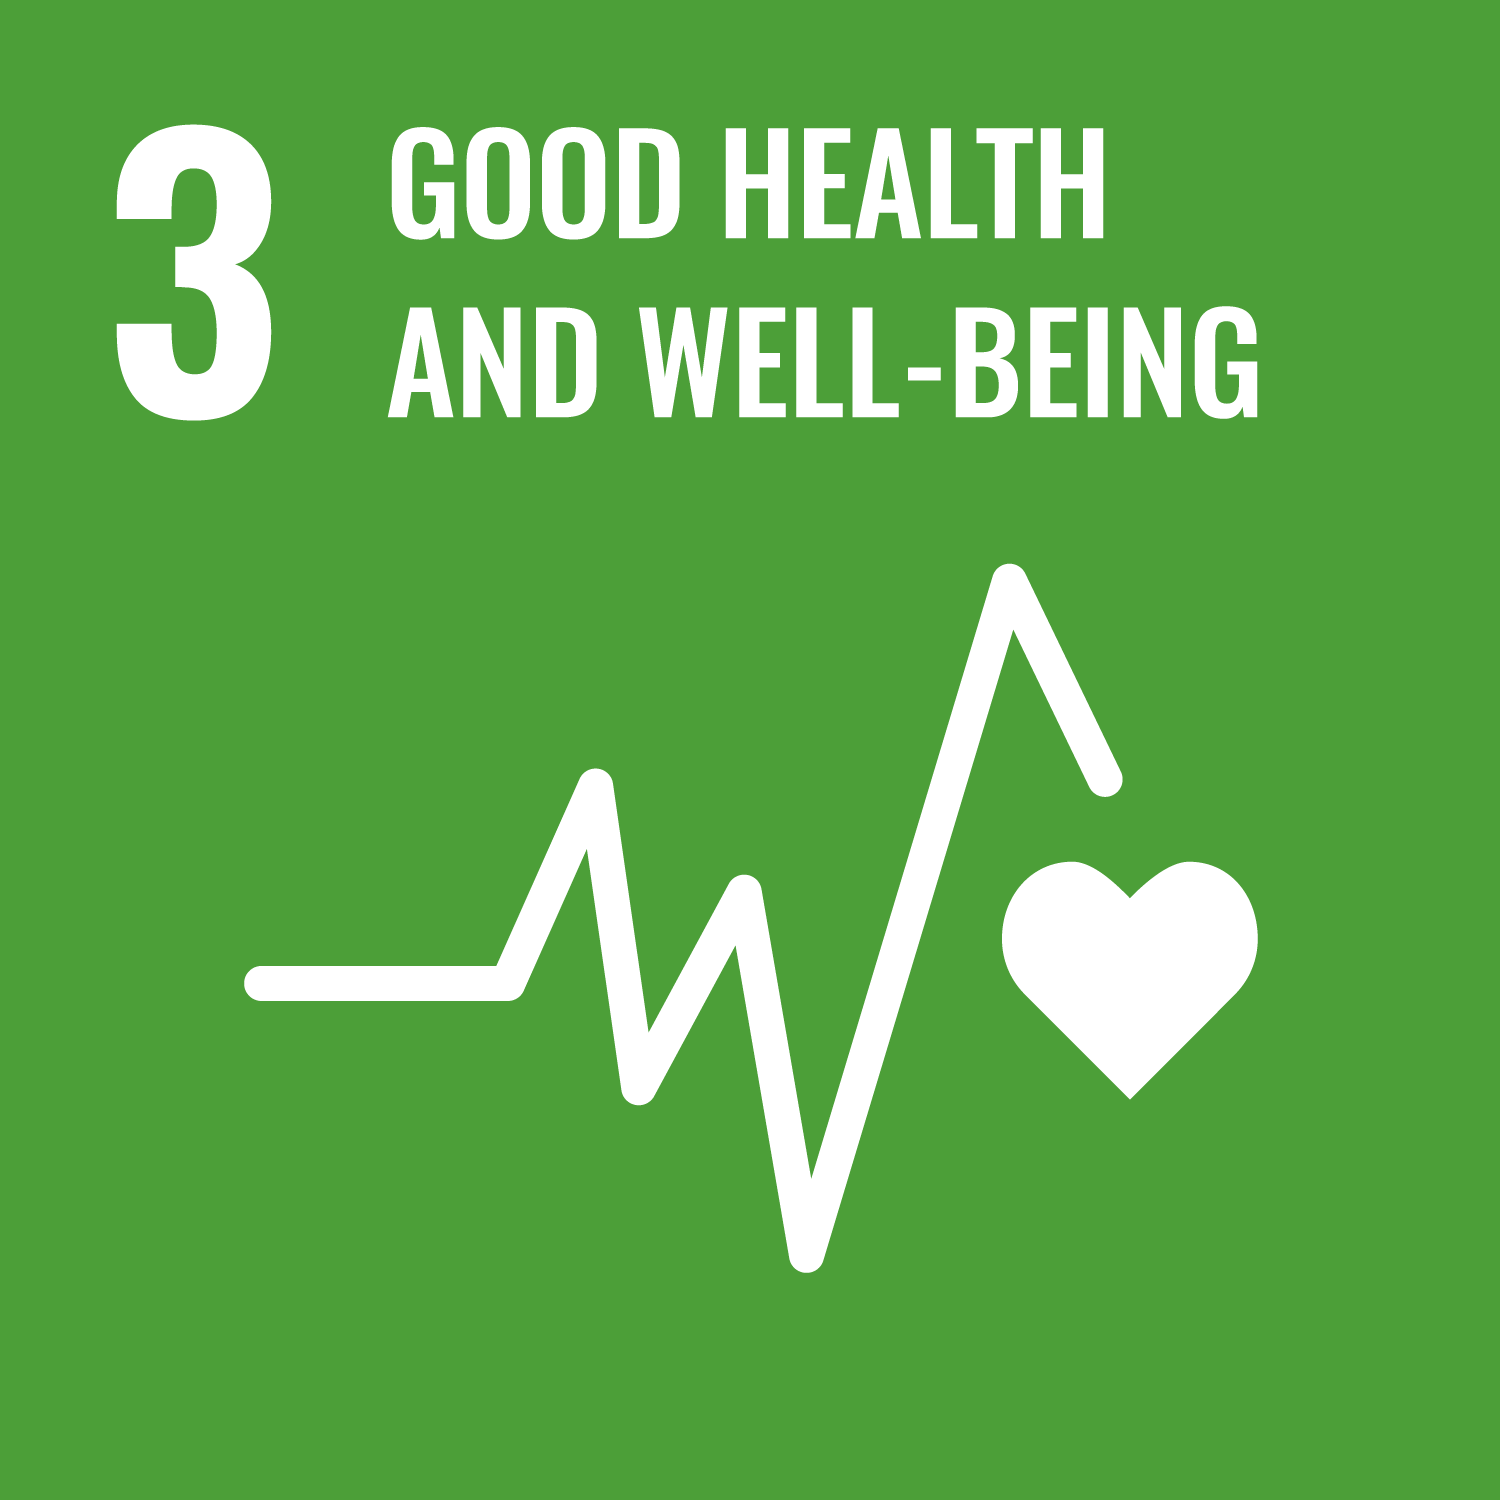 sustainable-development-goals-good-health-and-well-being